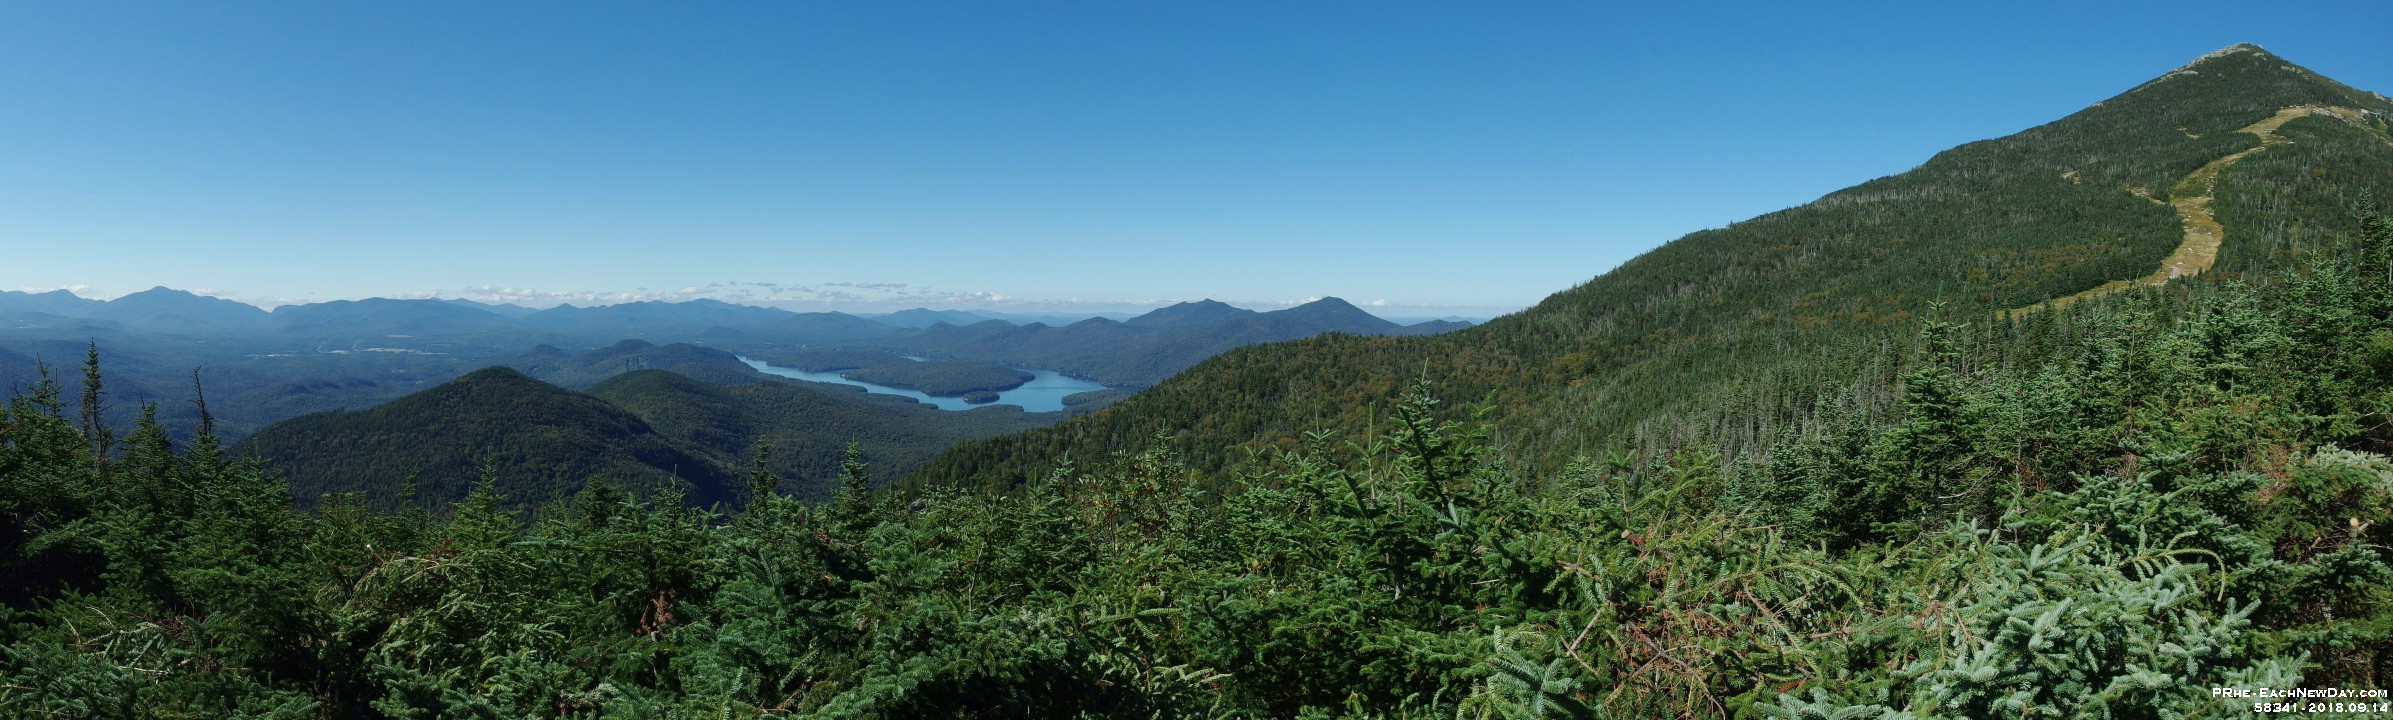 58341PaCrLe - New York vacation - Little Whiteface Mountain - Lake Placid